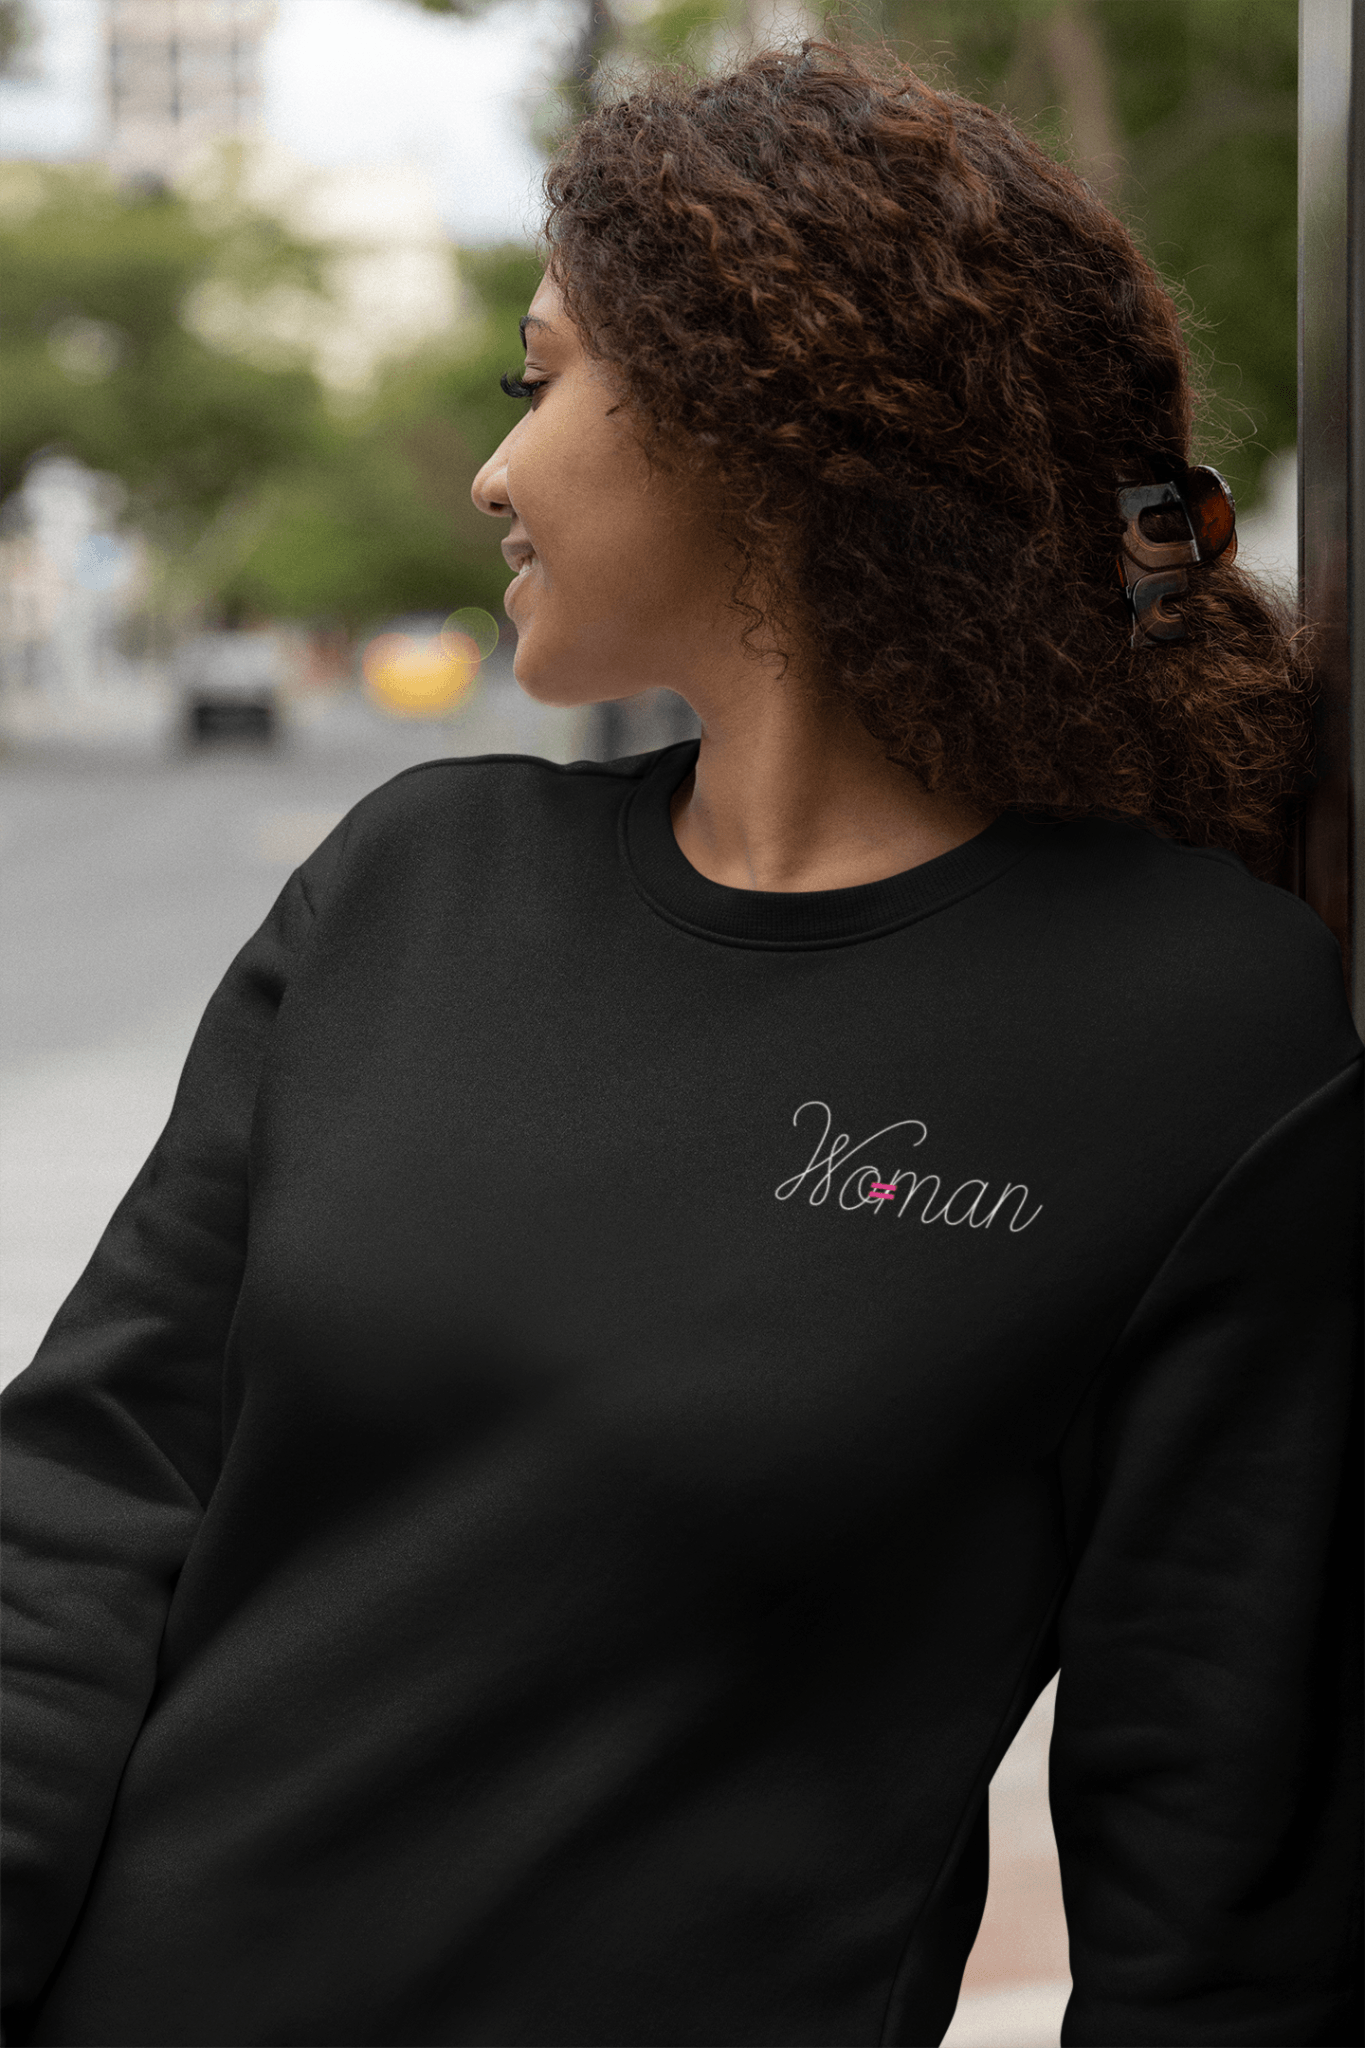 Women's Equality Embroidered Unisex Sweatshirt - The Kindness Cause